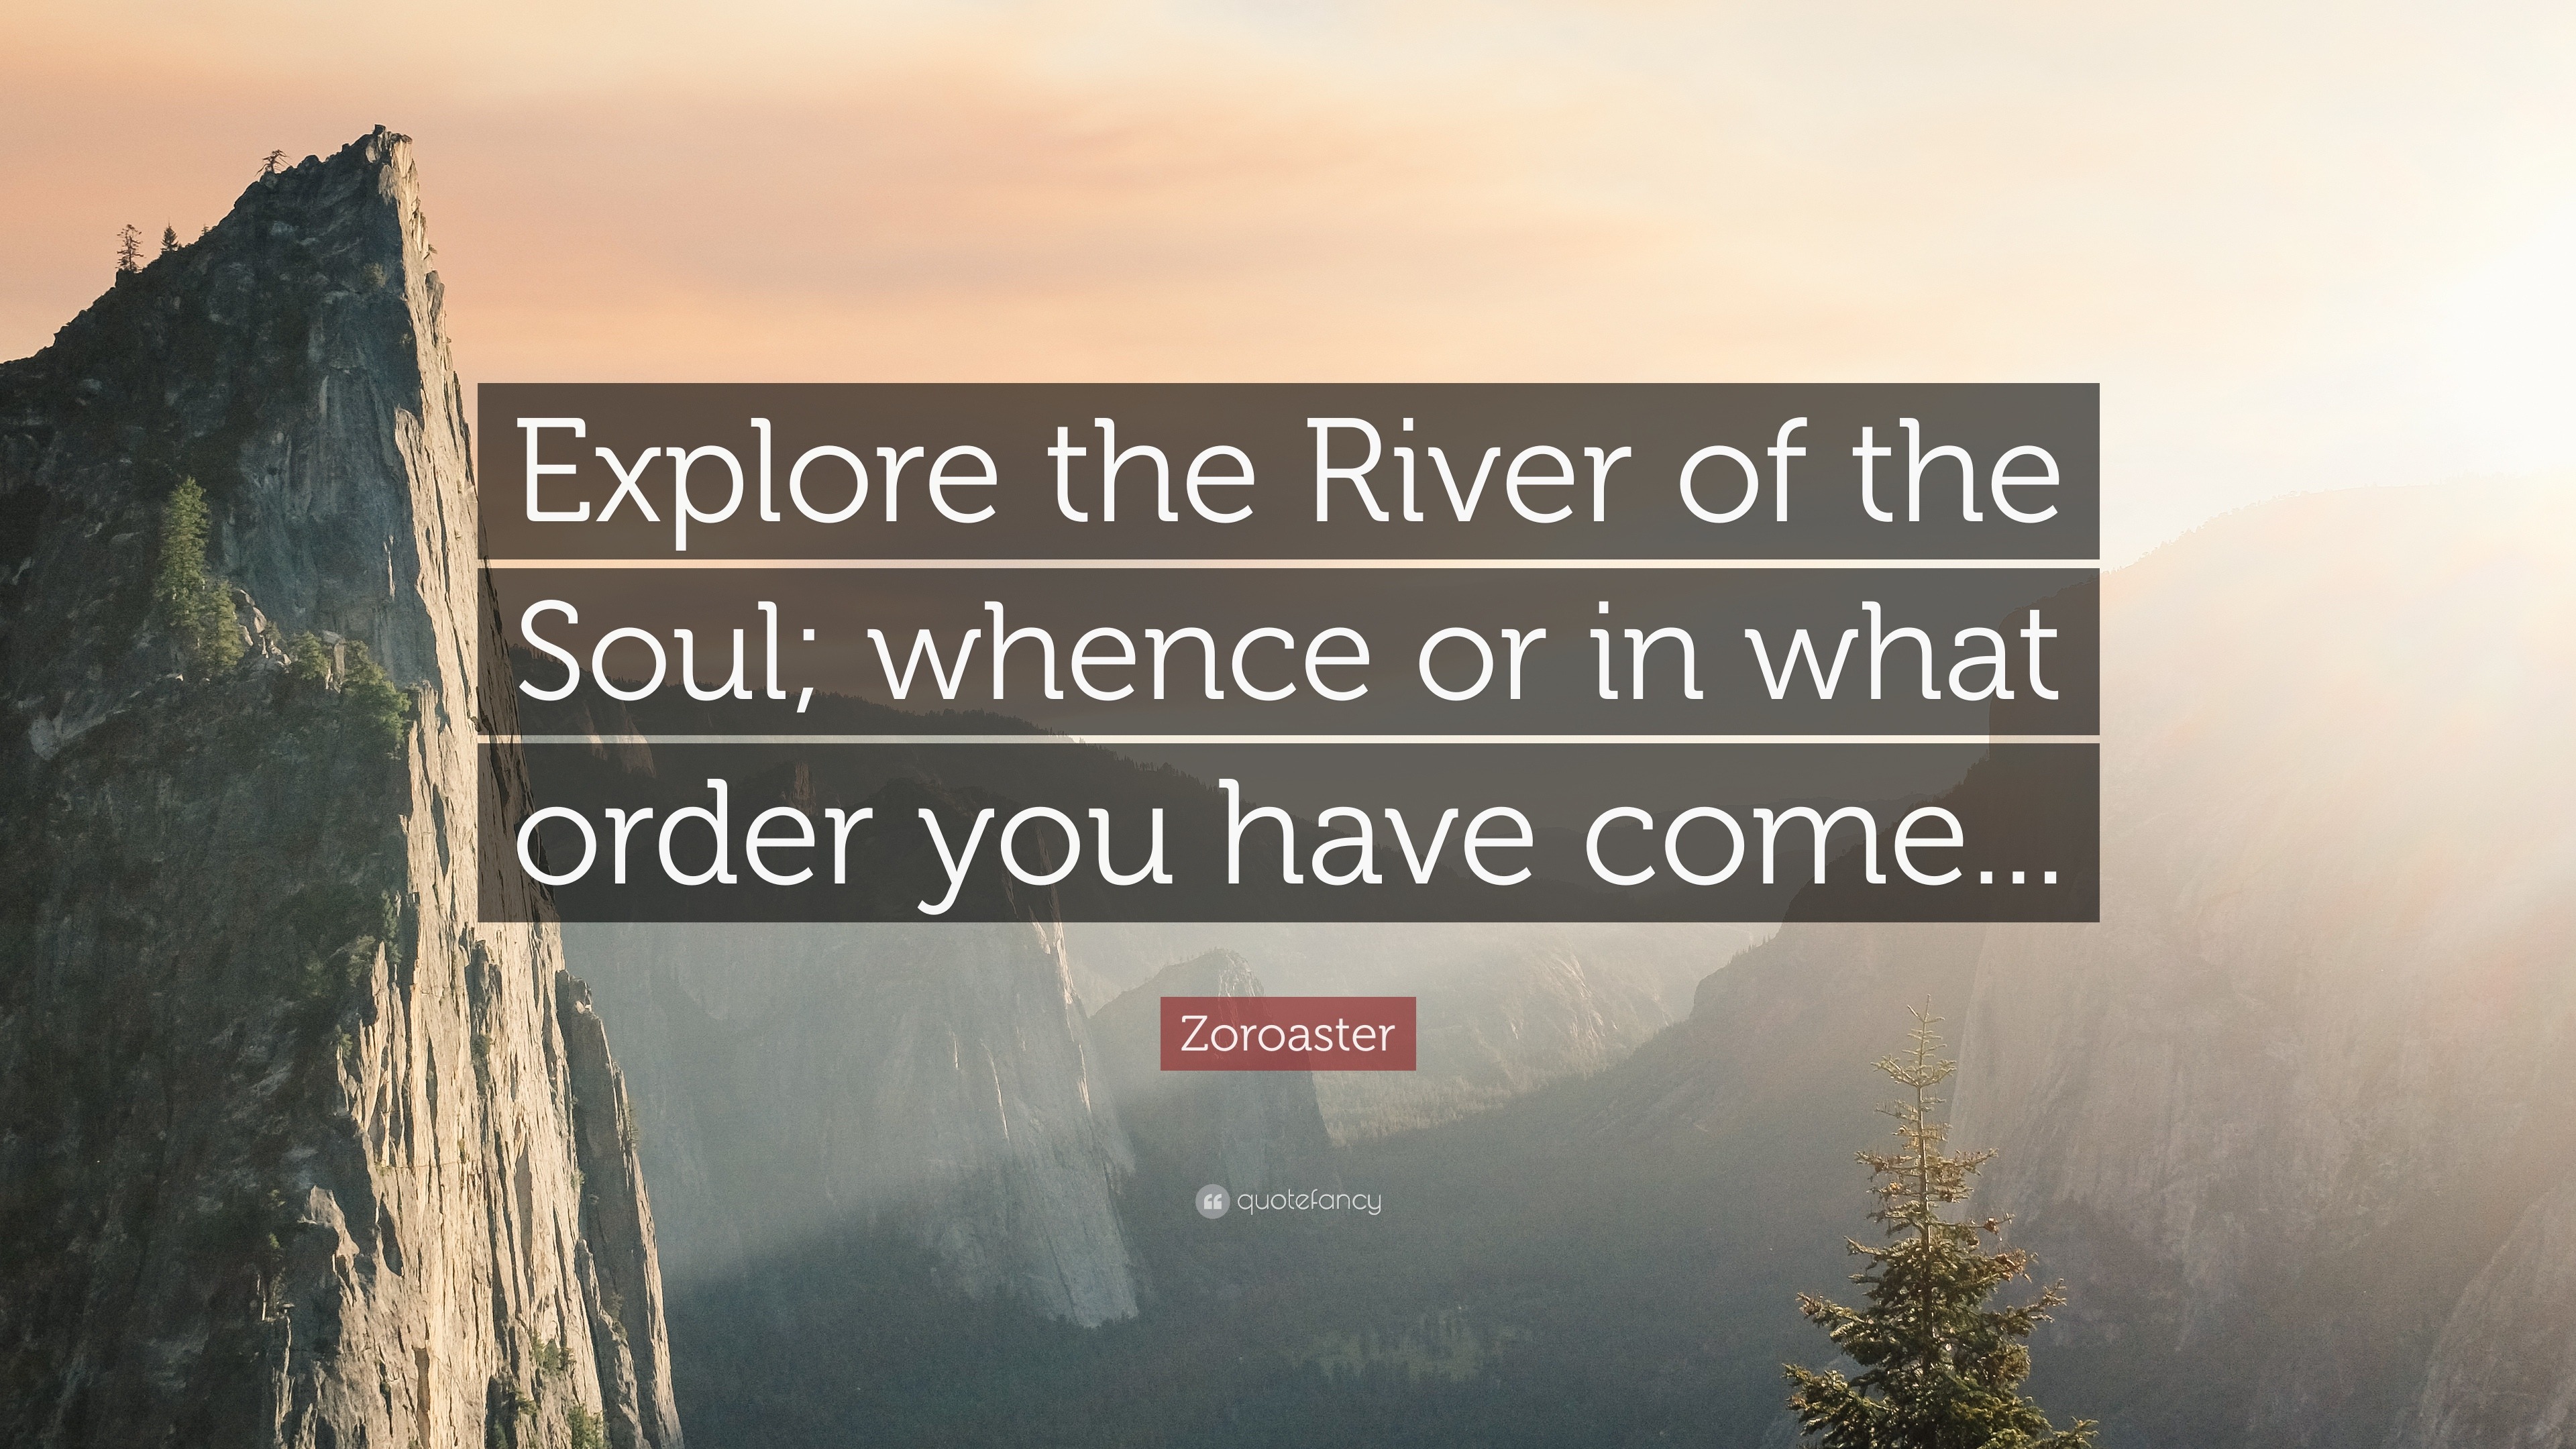 Explore the River of the Soul; whence or in what order you have come. 